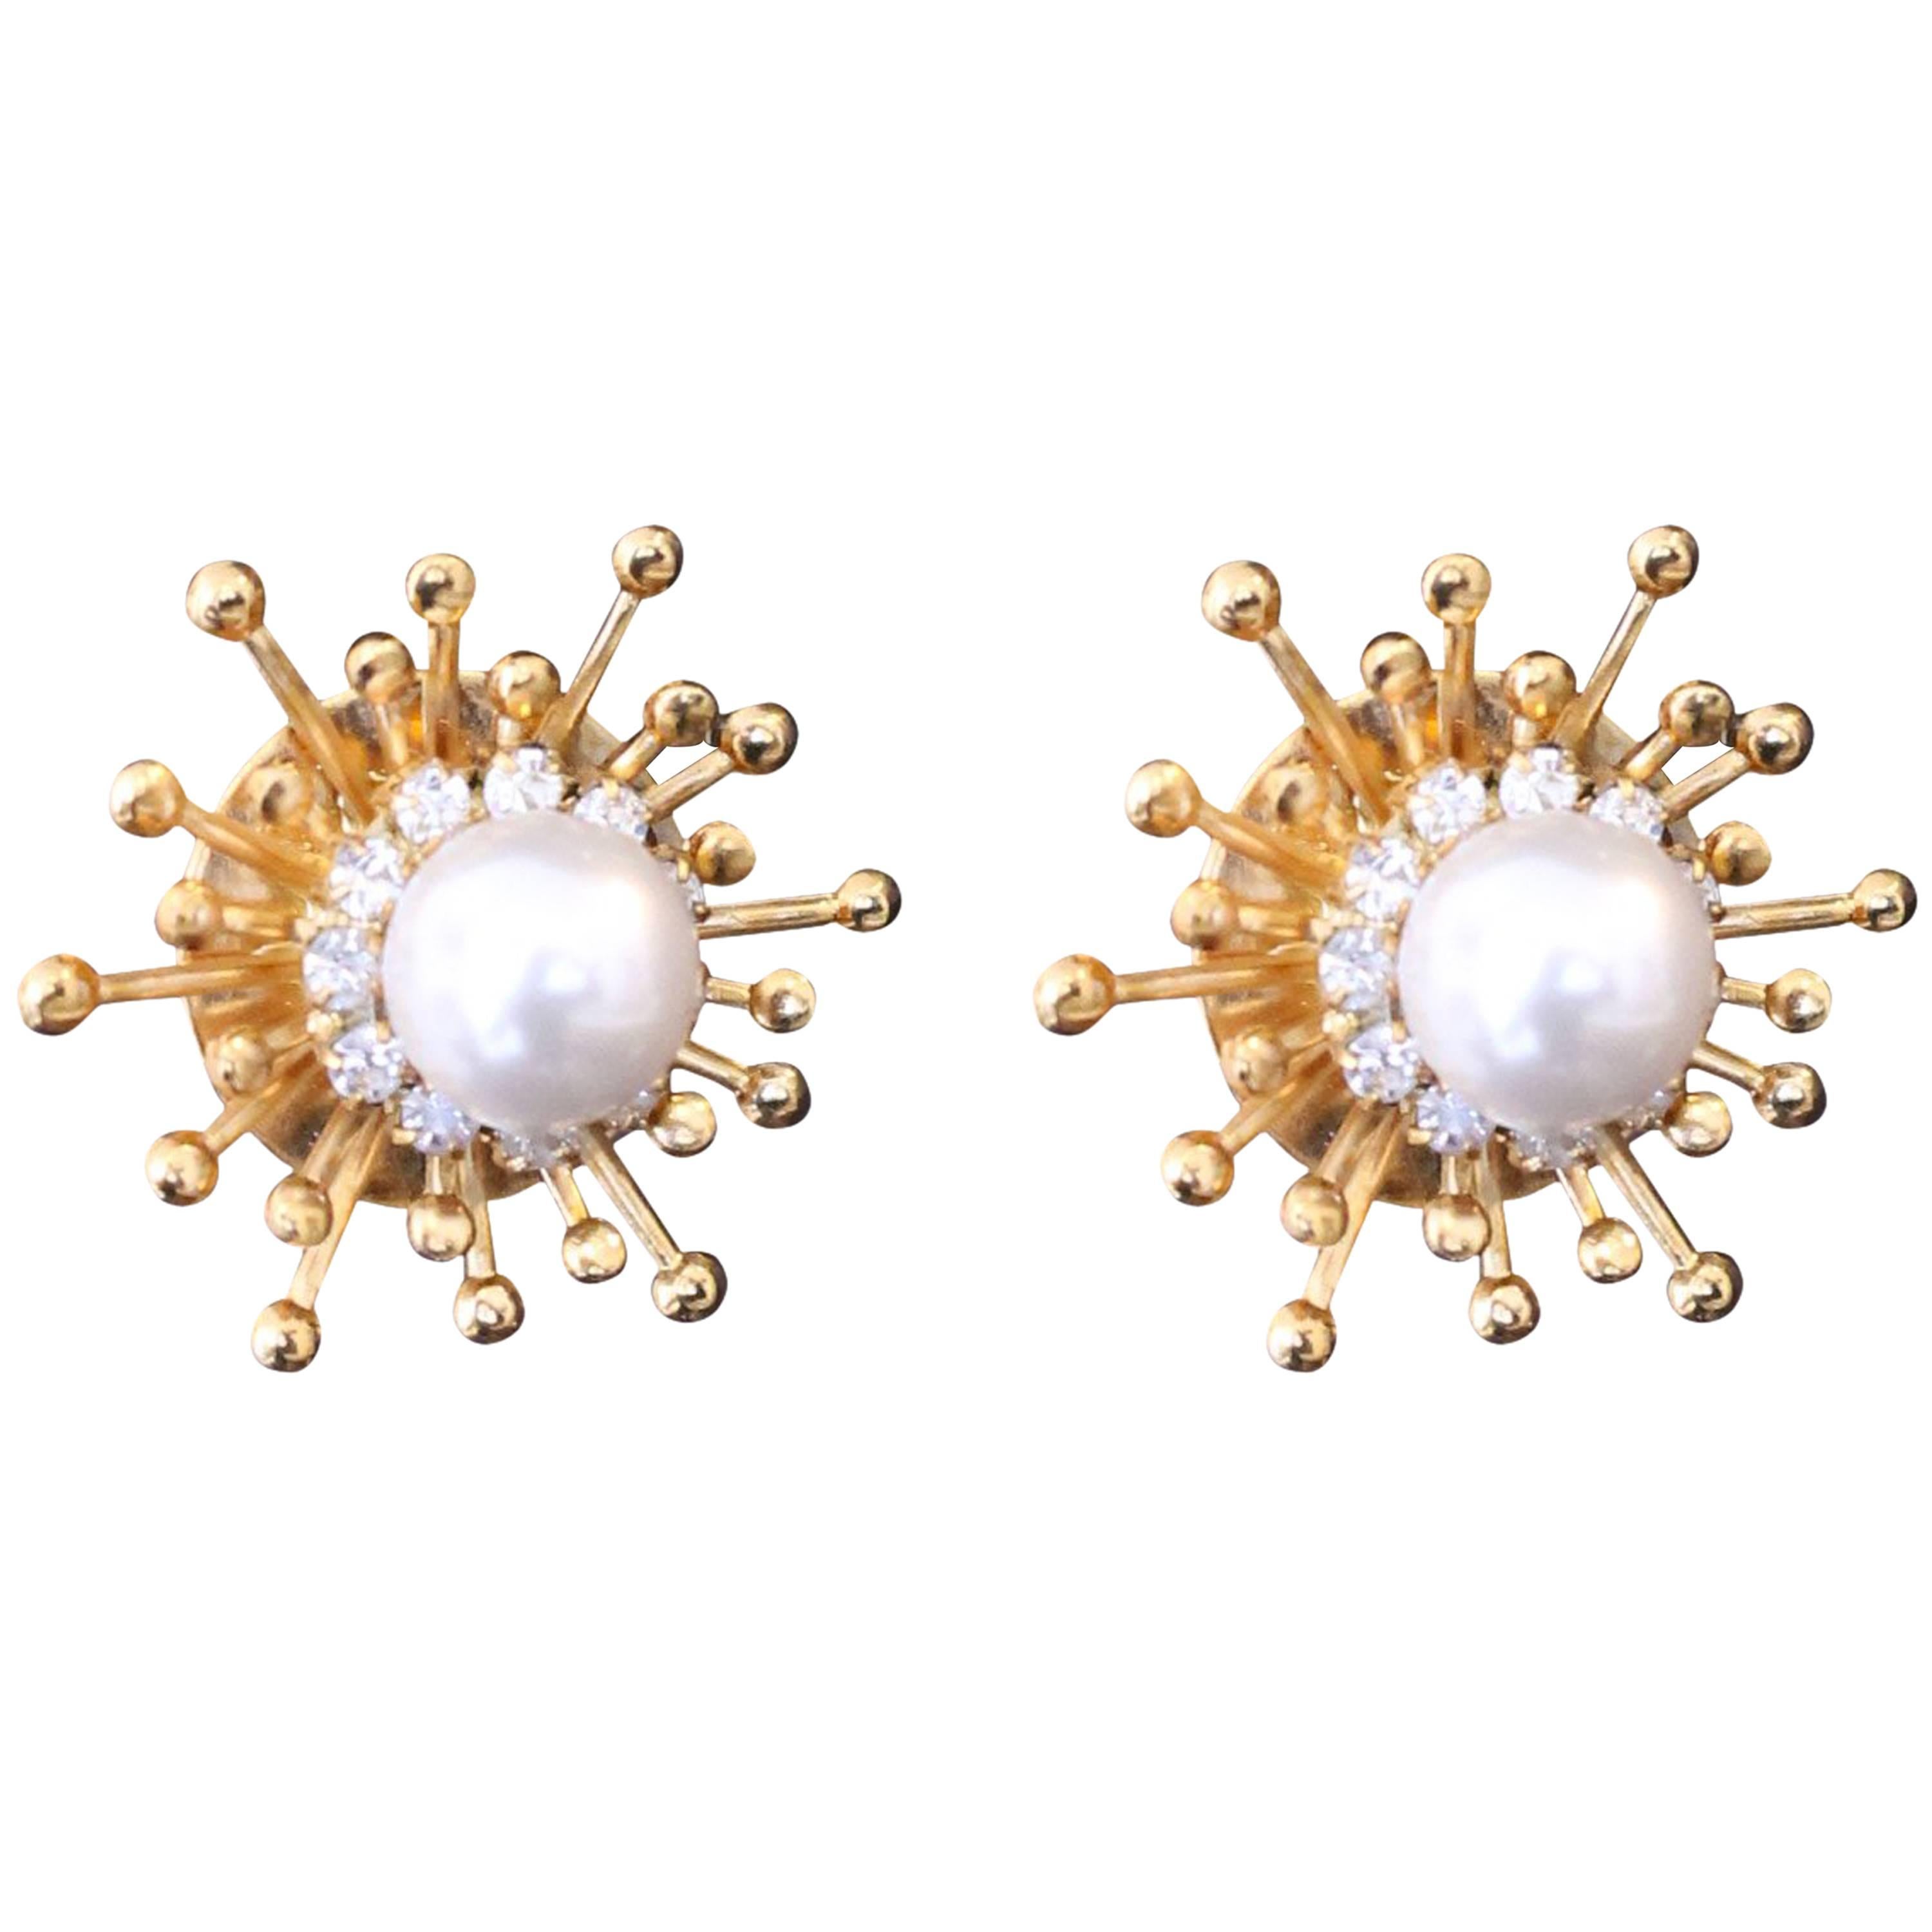 21st Century Modern Gold Plated Floral Cluster Pearl Earrings by VICKISARGE